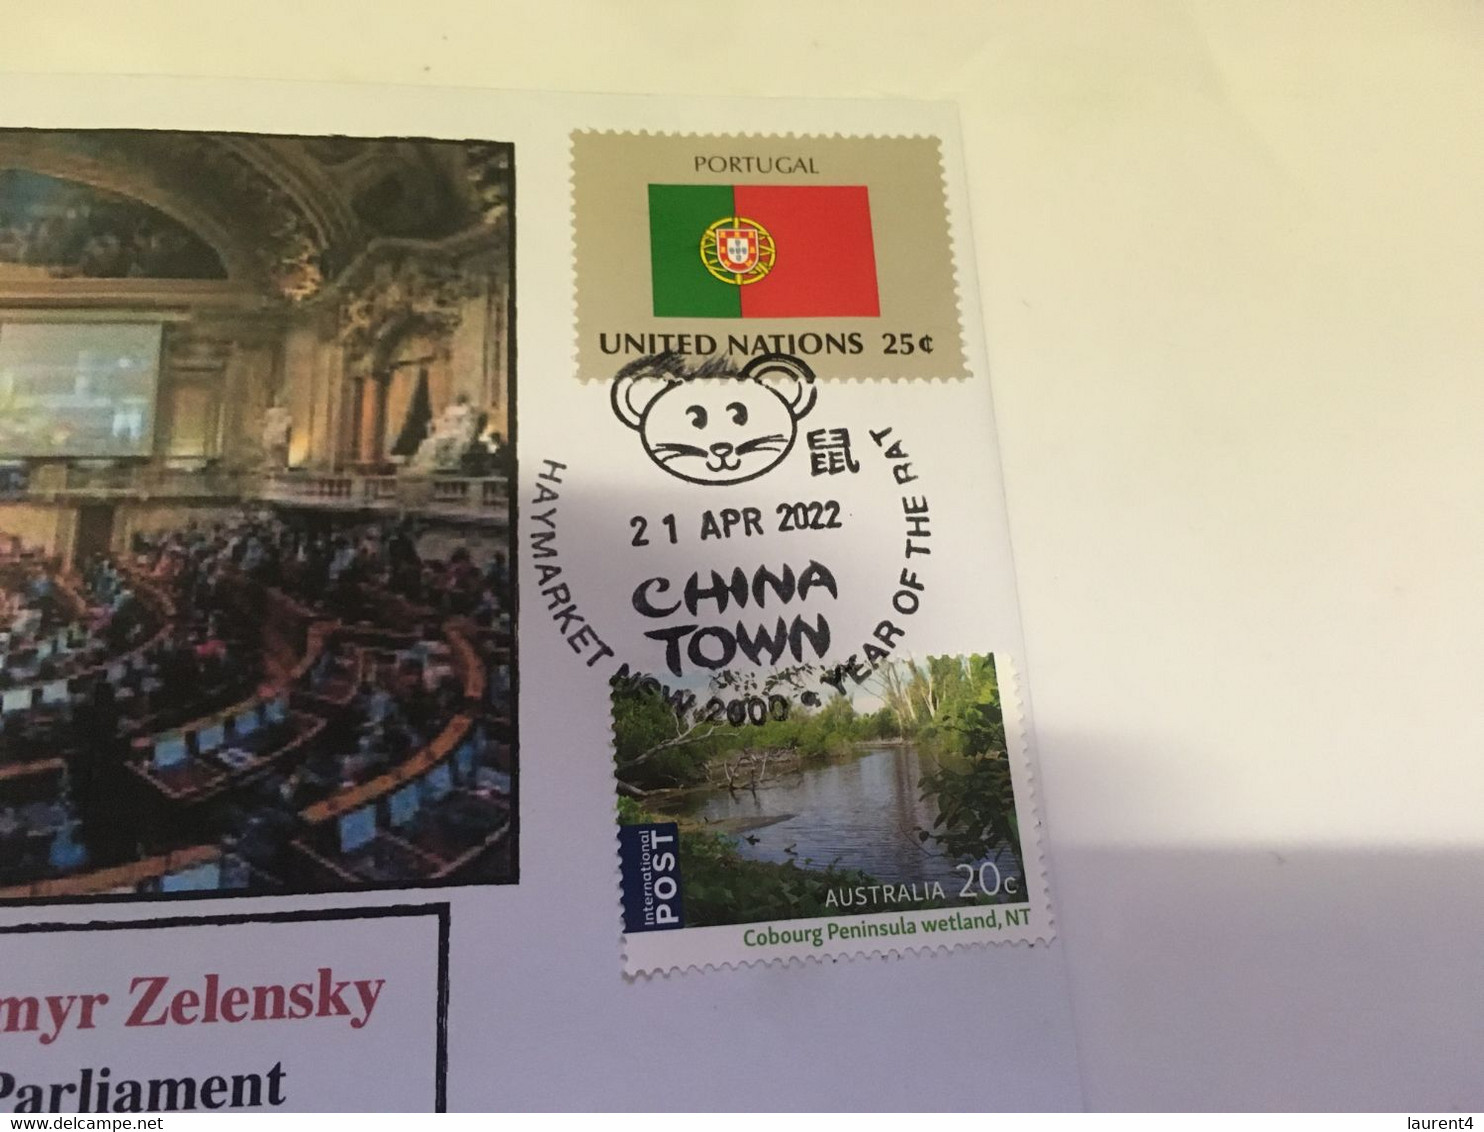 (3 H 28) UKRAINE President Address To Portugal Parliament (21st April 2022) With OZ Map Stamp + Portugal Flag Stamp - Covers & Documents